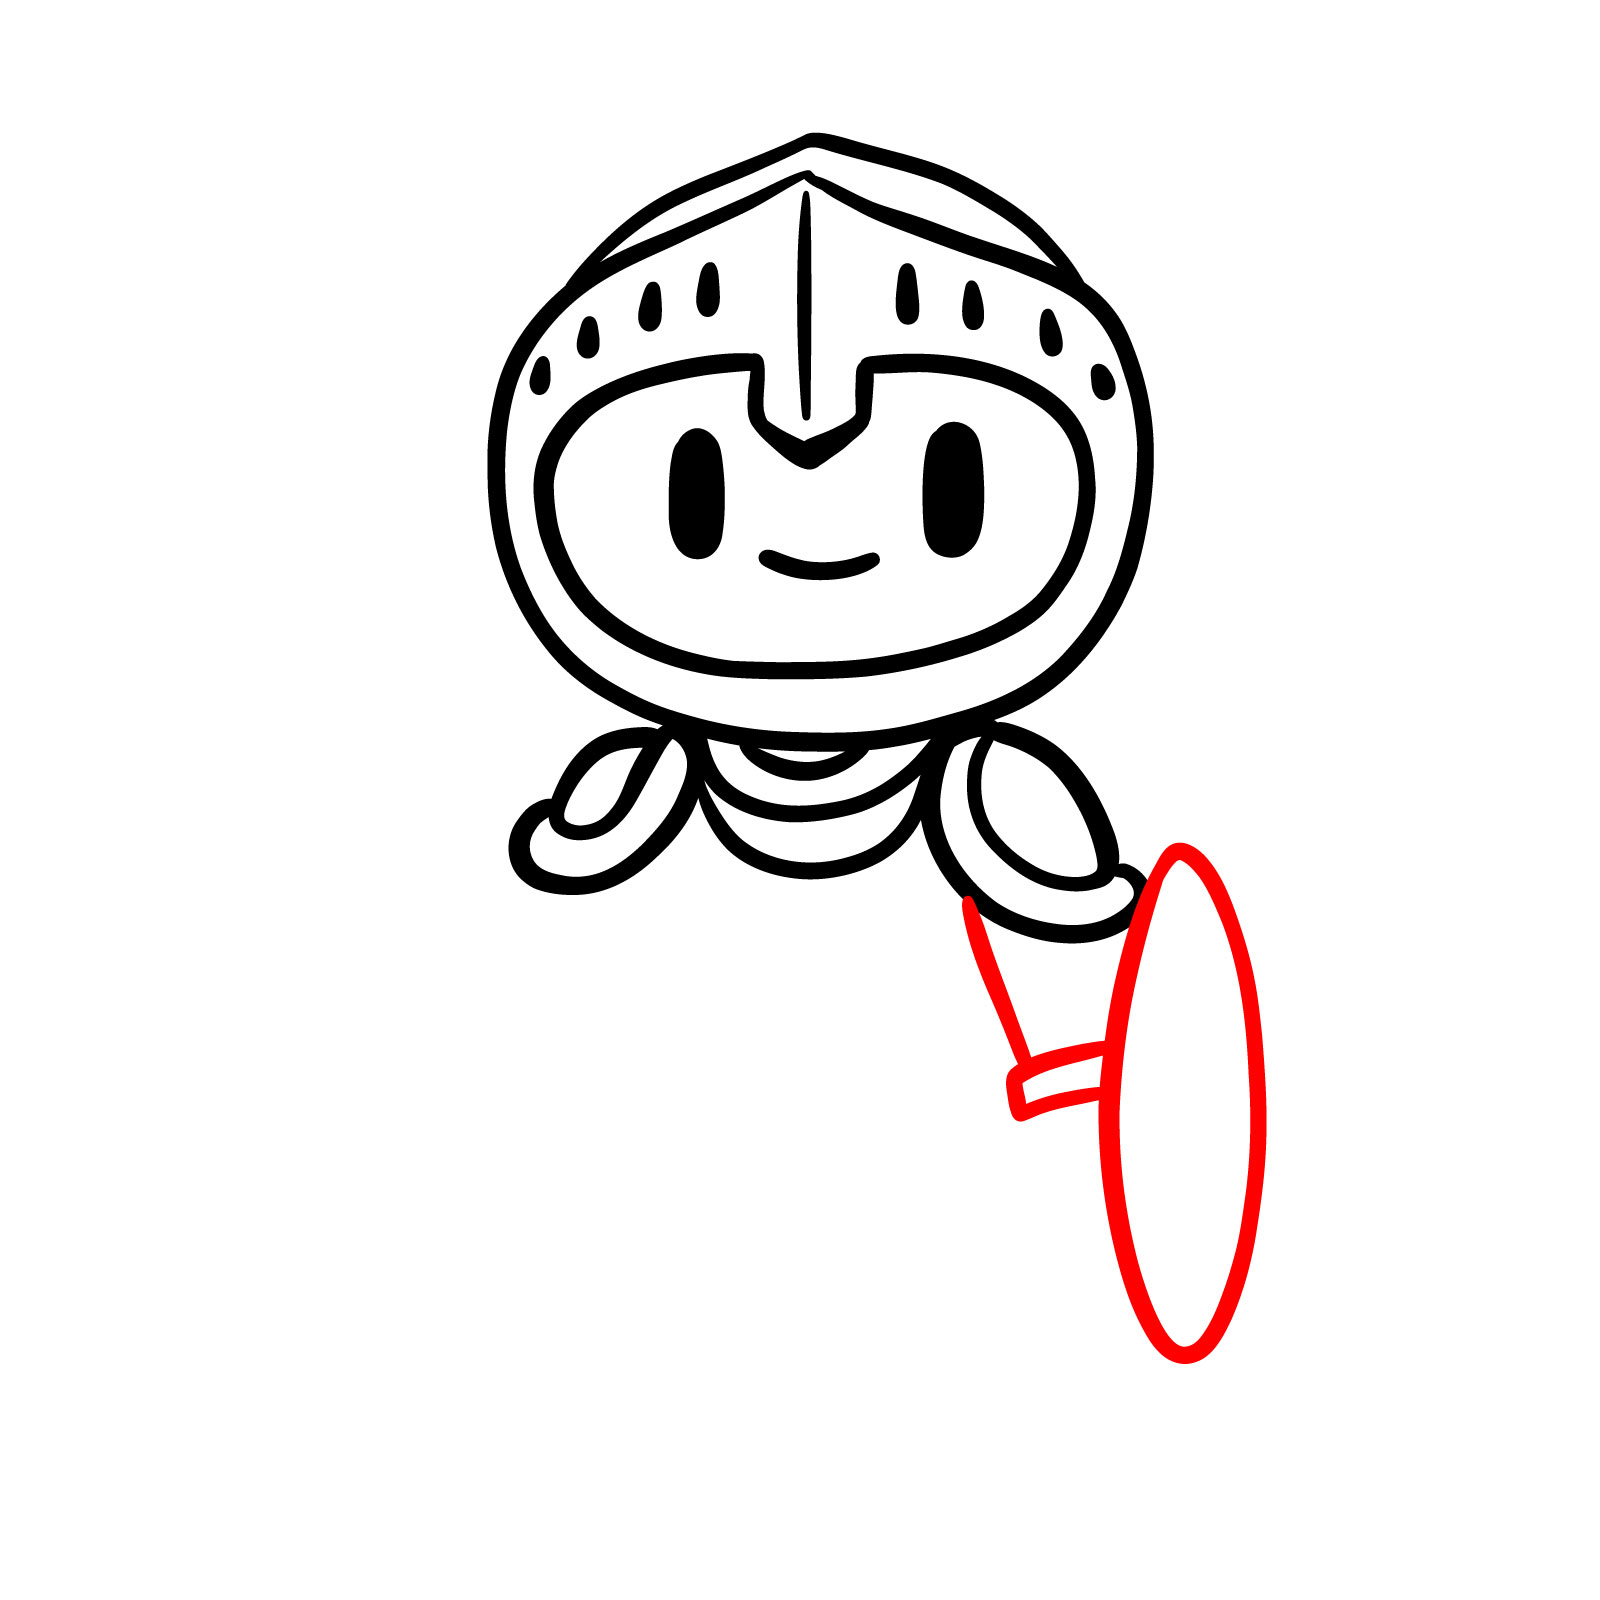 How to draw a cartoon paladin step 5: arm and shield